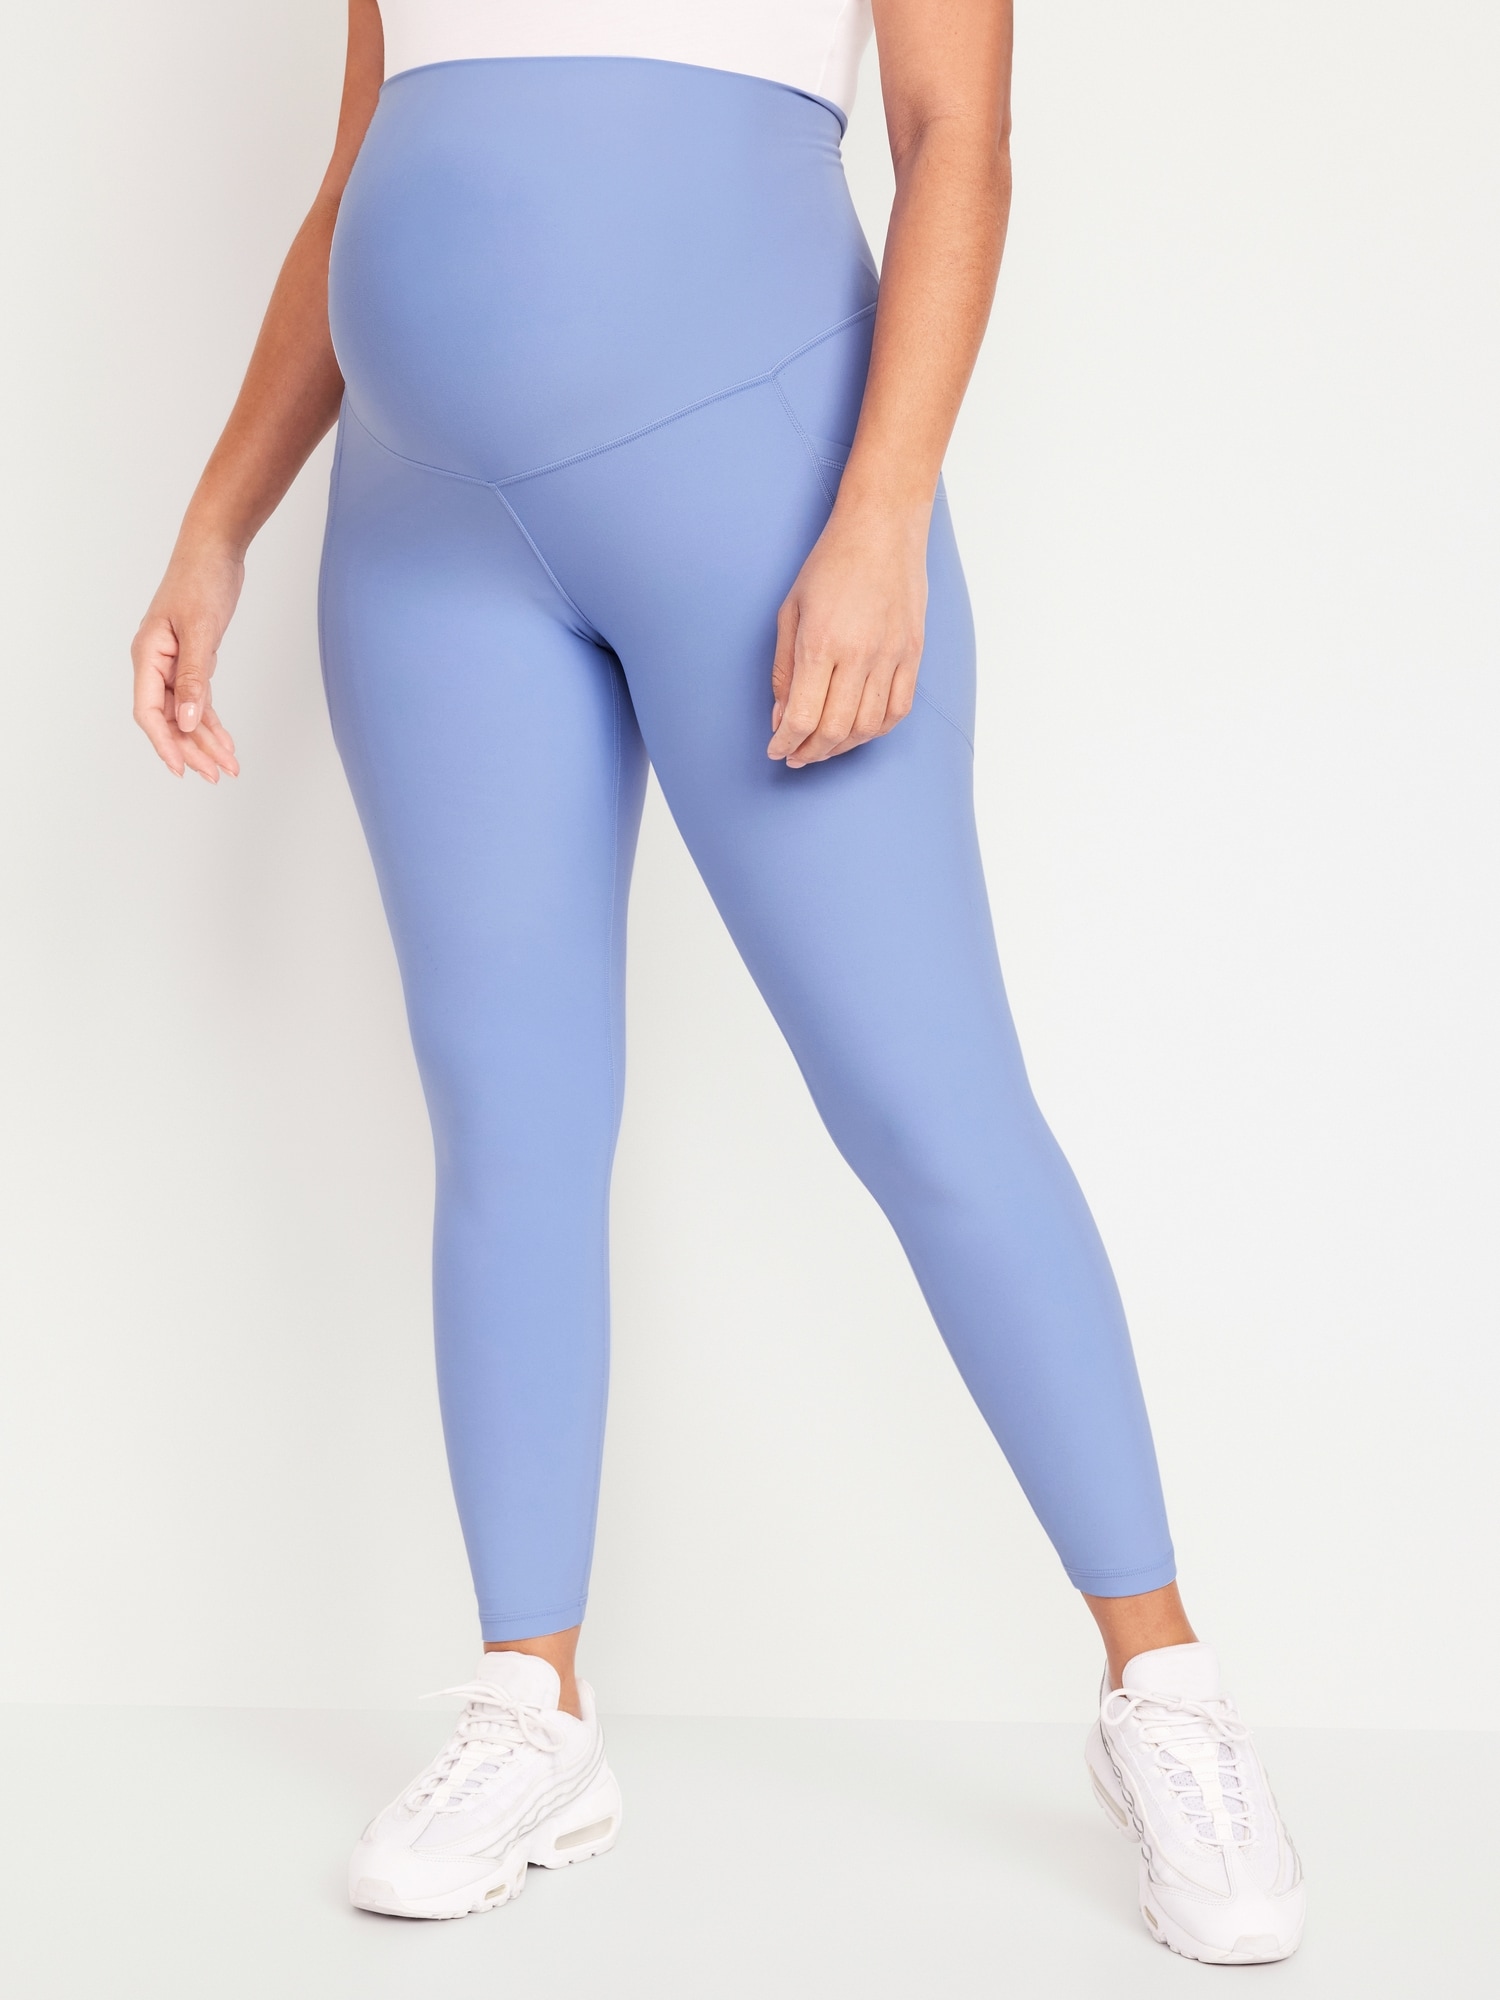 Old Navy Maternity Full-Panel PowerSoft 7/8 Leggings, Old Navy deals this  week, Old Navy weekly ad